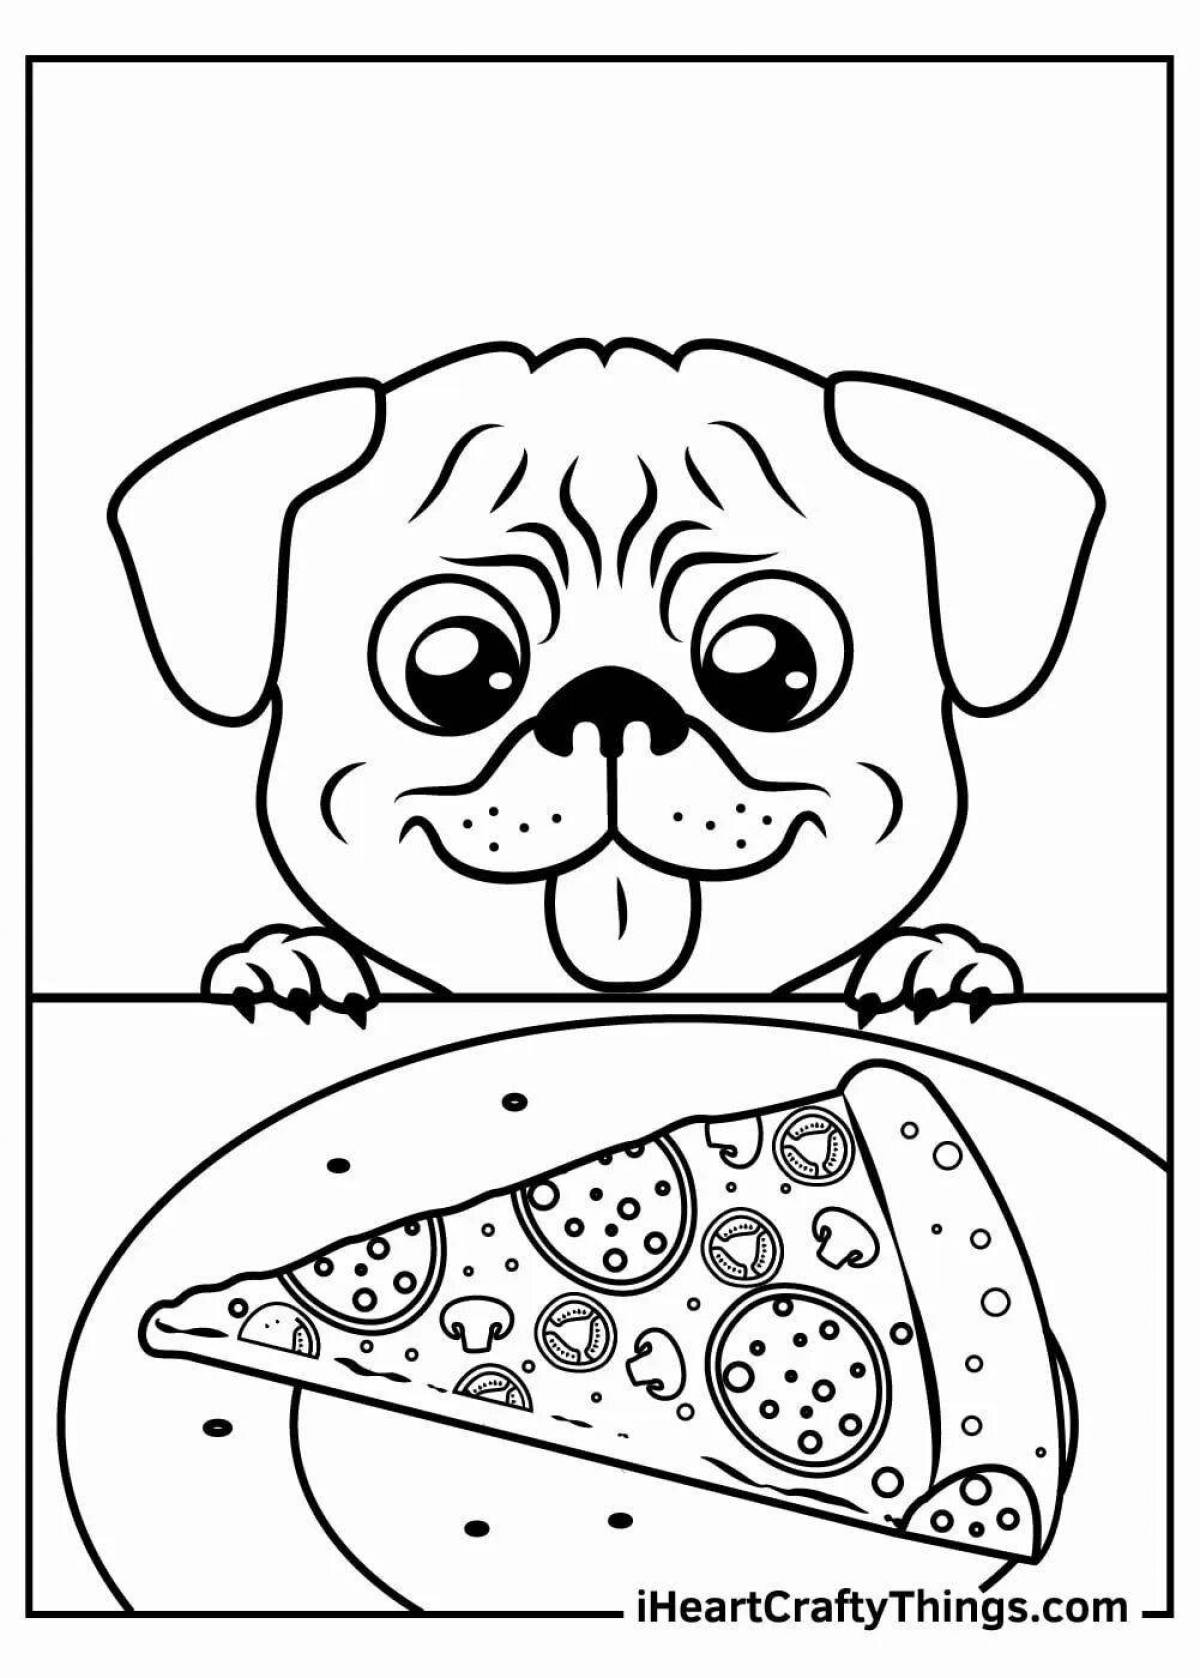 Adorable pug coloring page for kids